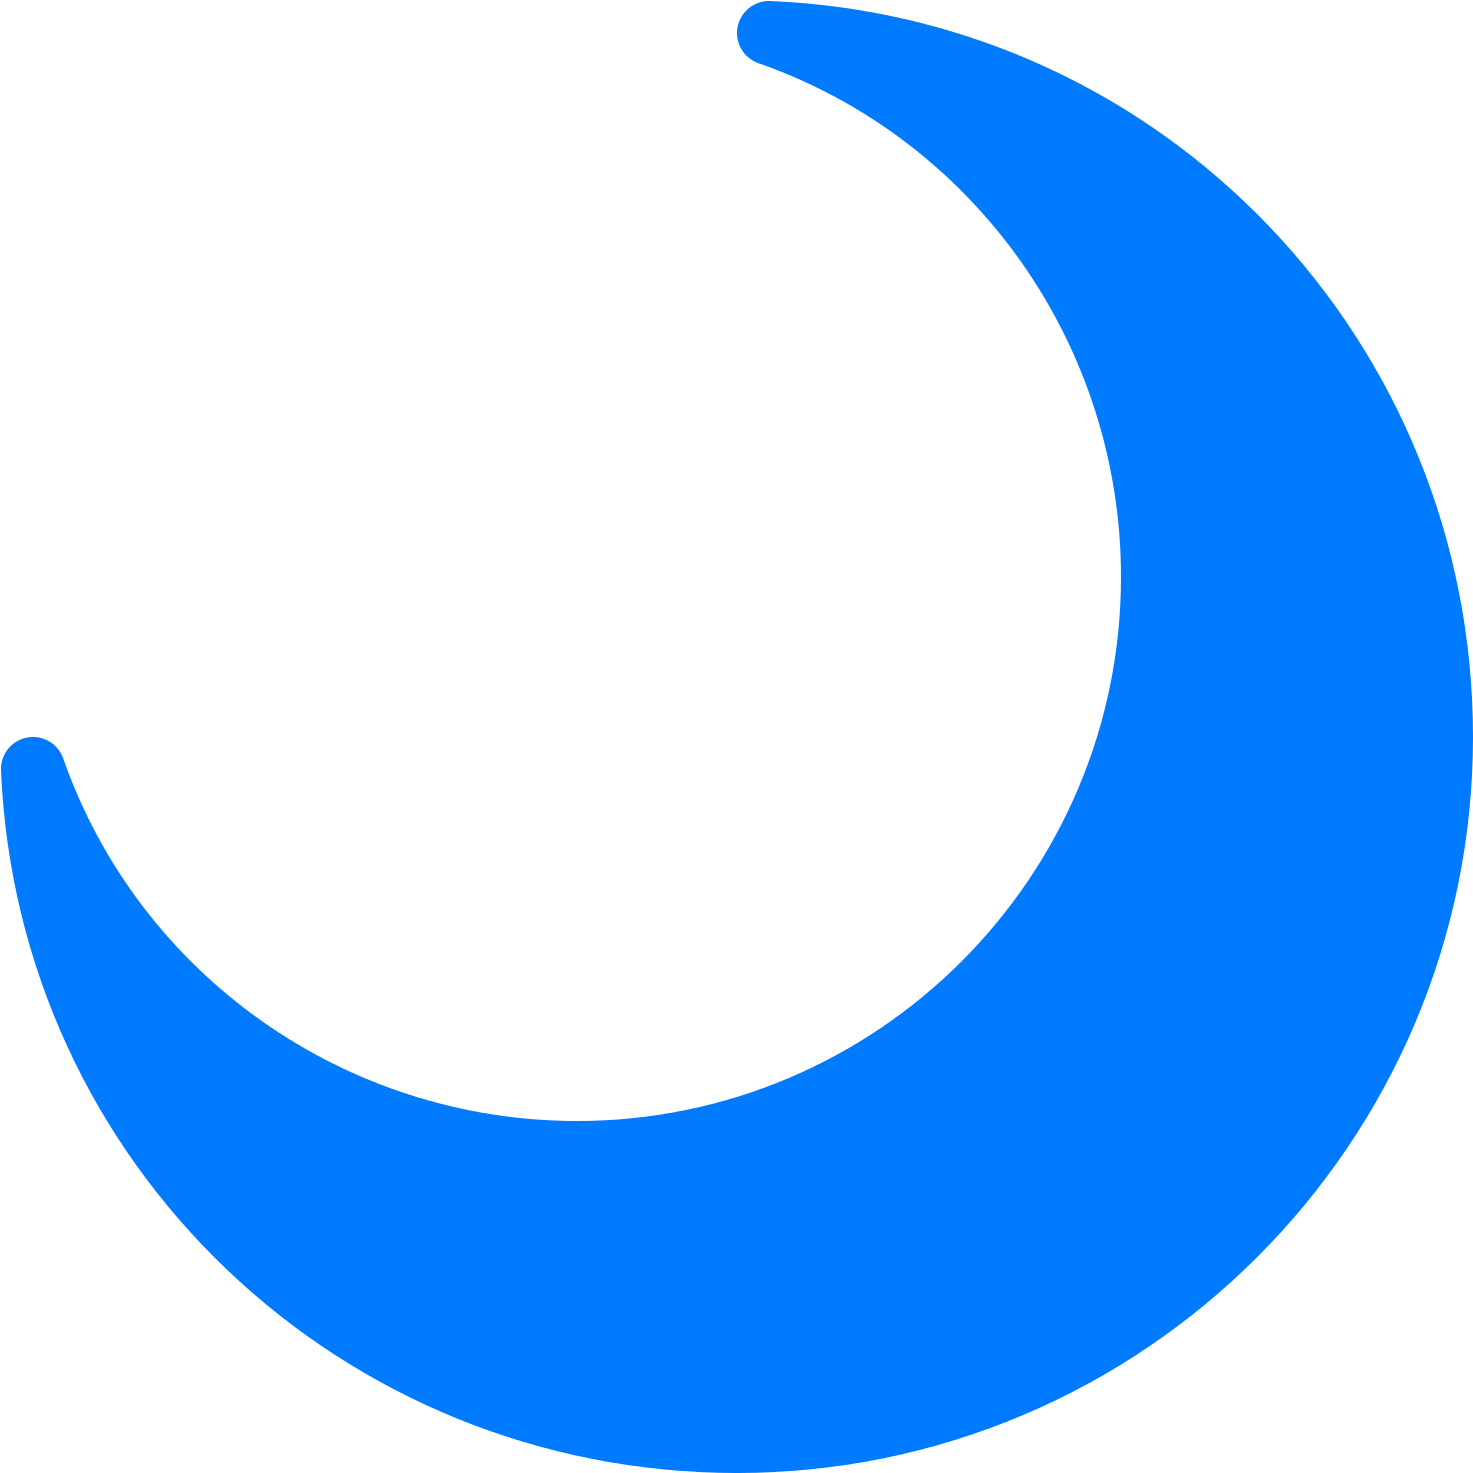 A Blue Crescent Moon On A Black Background